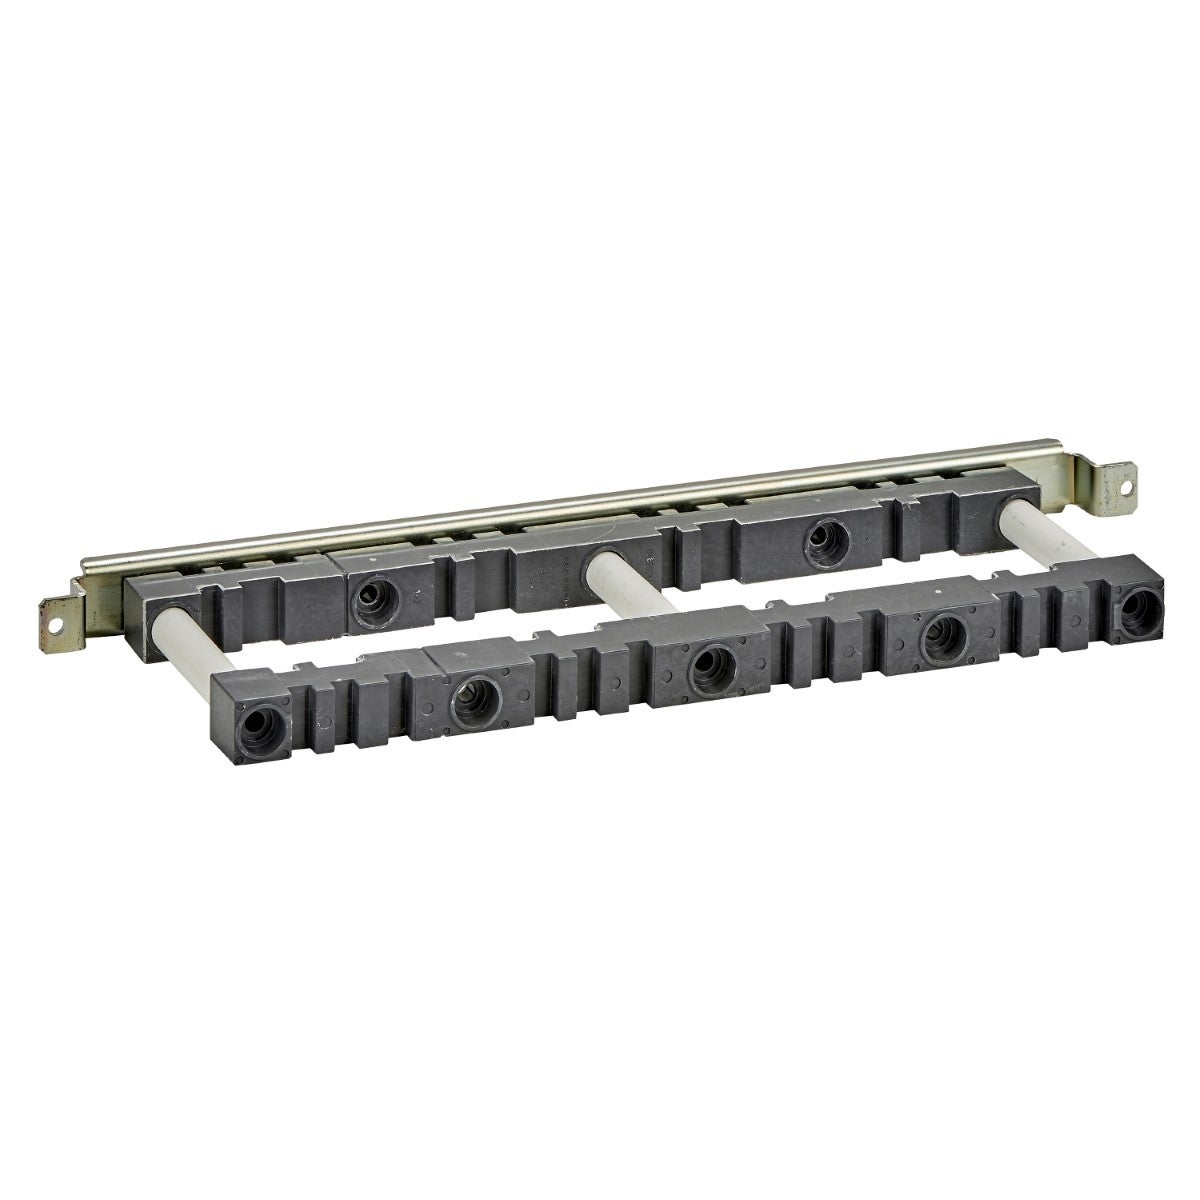 Busbar support, Linergy BS, 115mm between centers, for 5 to 10mm thick vertical busbar, D600